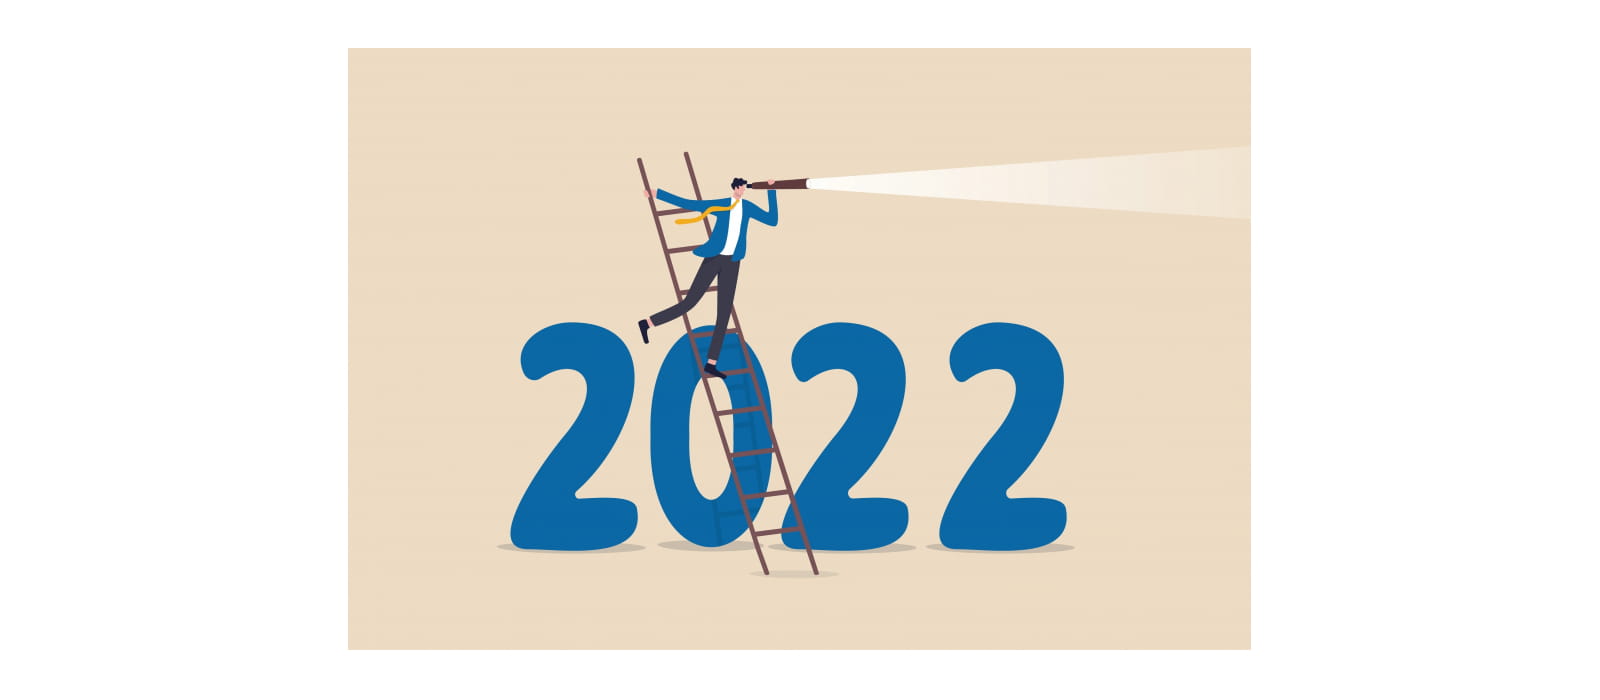 NOS ACTIONS PHARES 2022